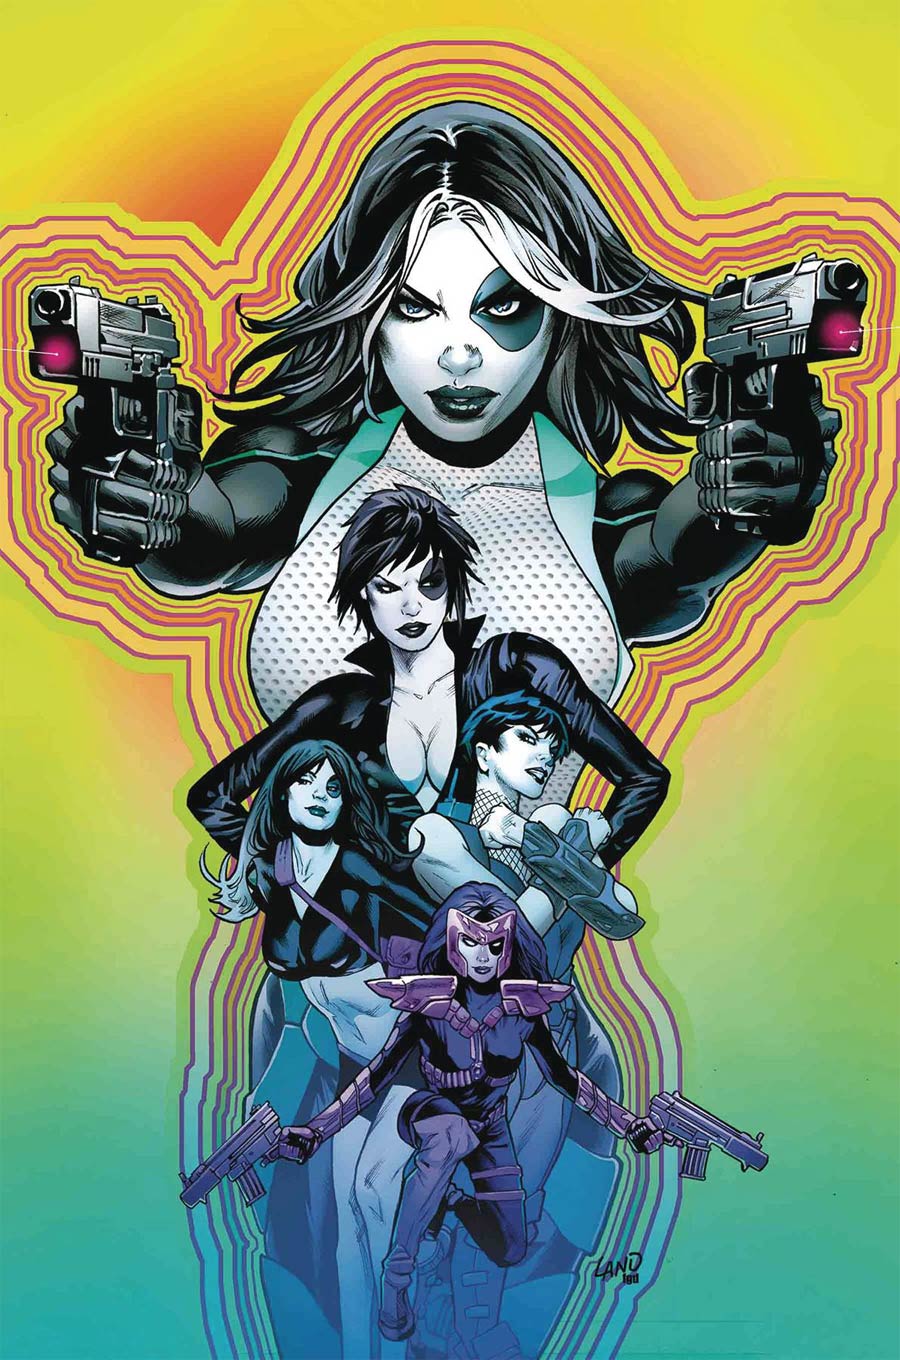 Domino Vol 3 #6 By Greg Land Poster